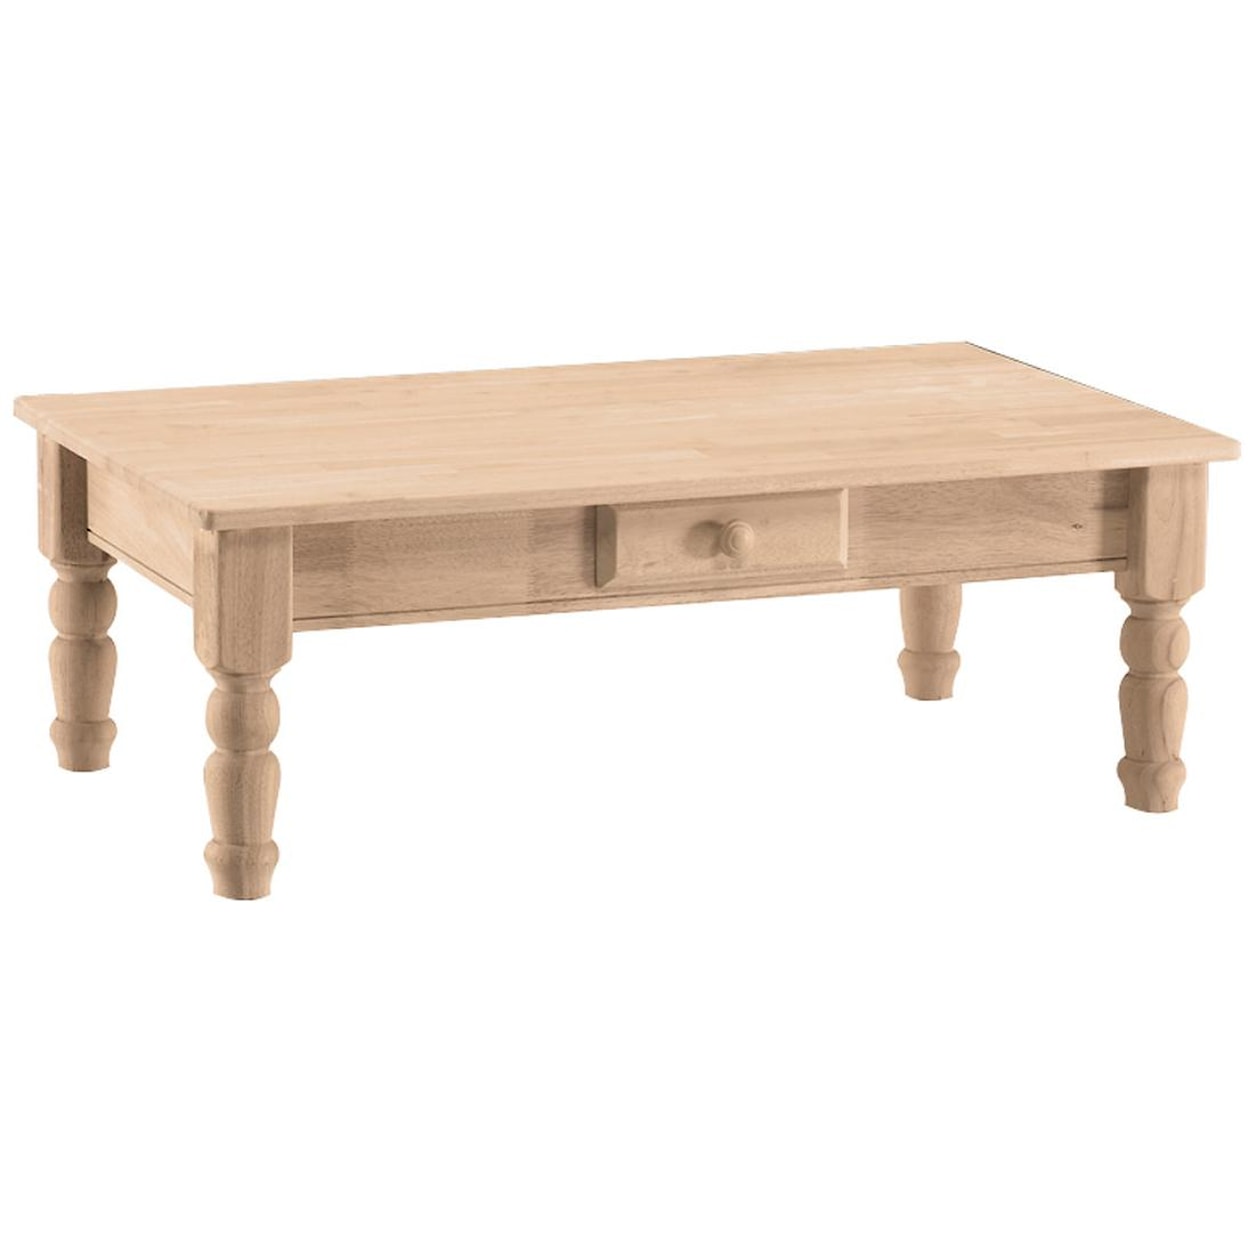 John Thomas SELECT Occasional & Accents Traditional Coffee Table